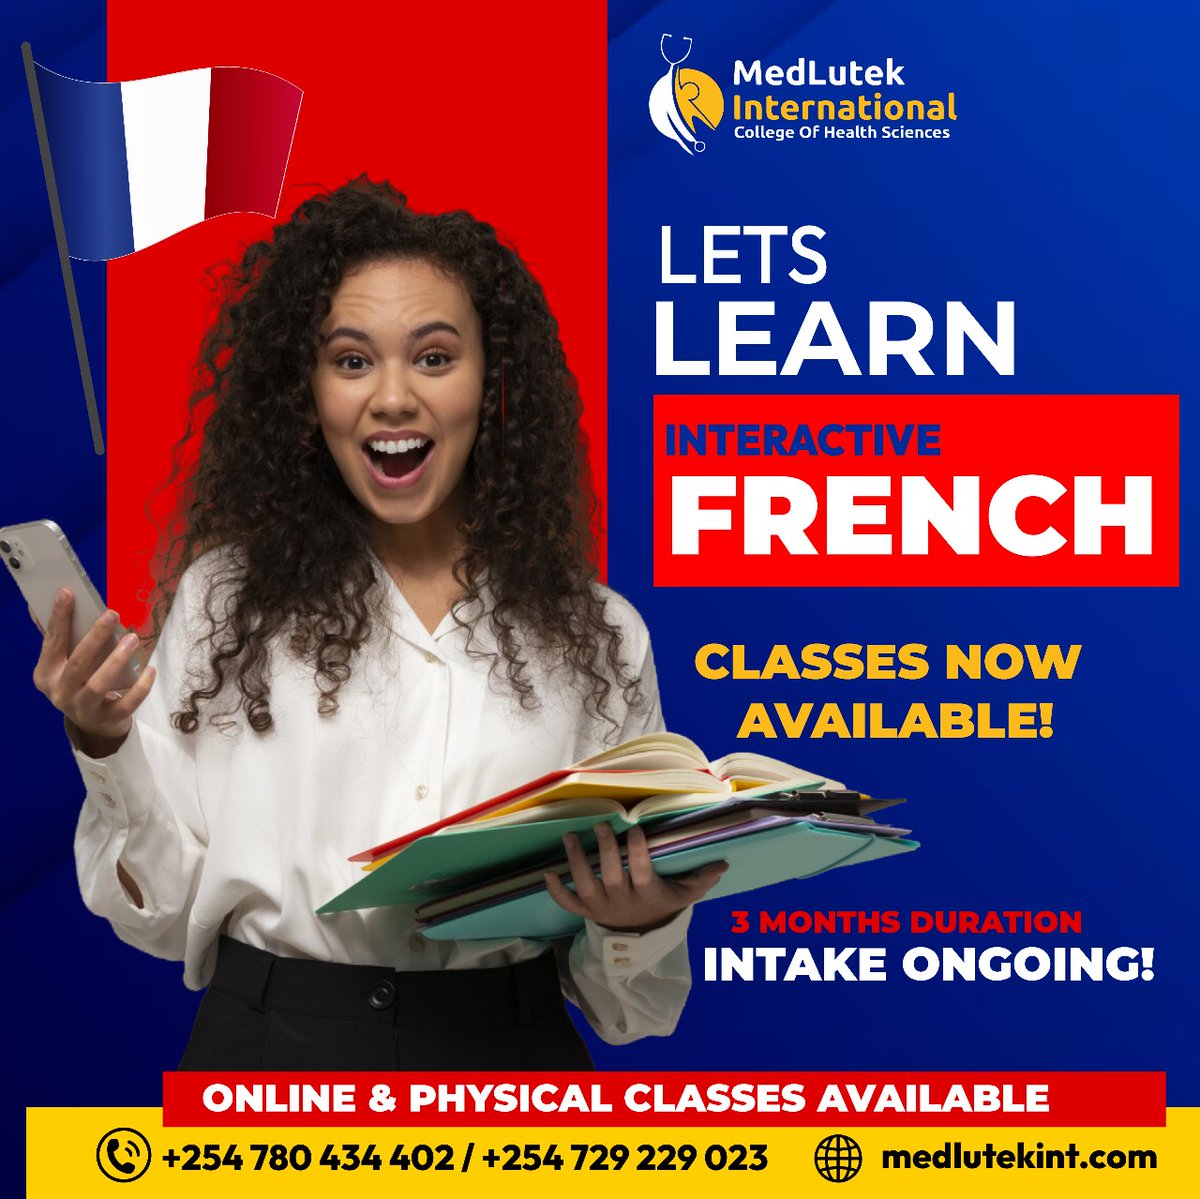 Whats stopping you from learning a new language? Join us, and learn French/Spanish, with our flexible online and part-time classes. Intake ongoing. medlutekint.com/enroll/ Call us on: 📞+254 780 434 402 0r +254 729 023 #Learnspanish #OnlineClasses #AprilIntake #Medlutekcares